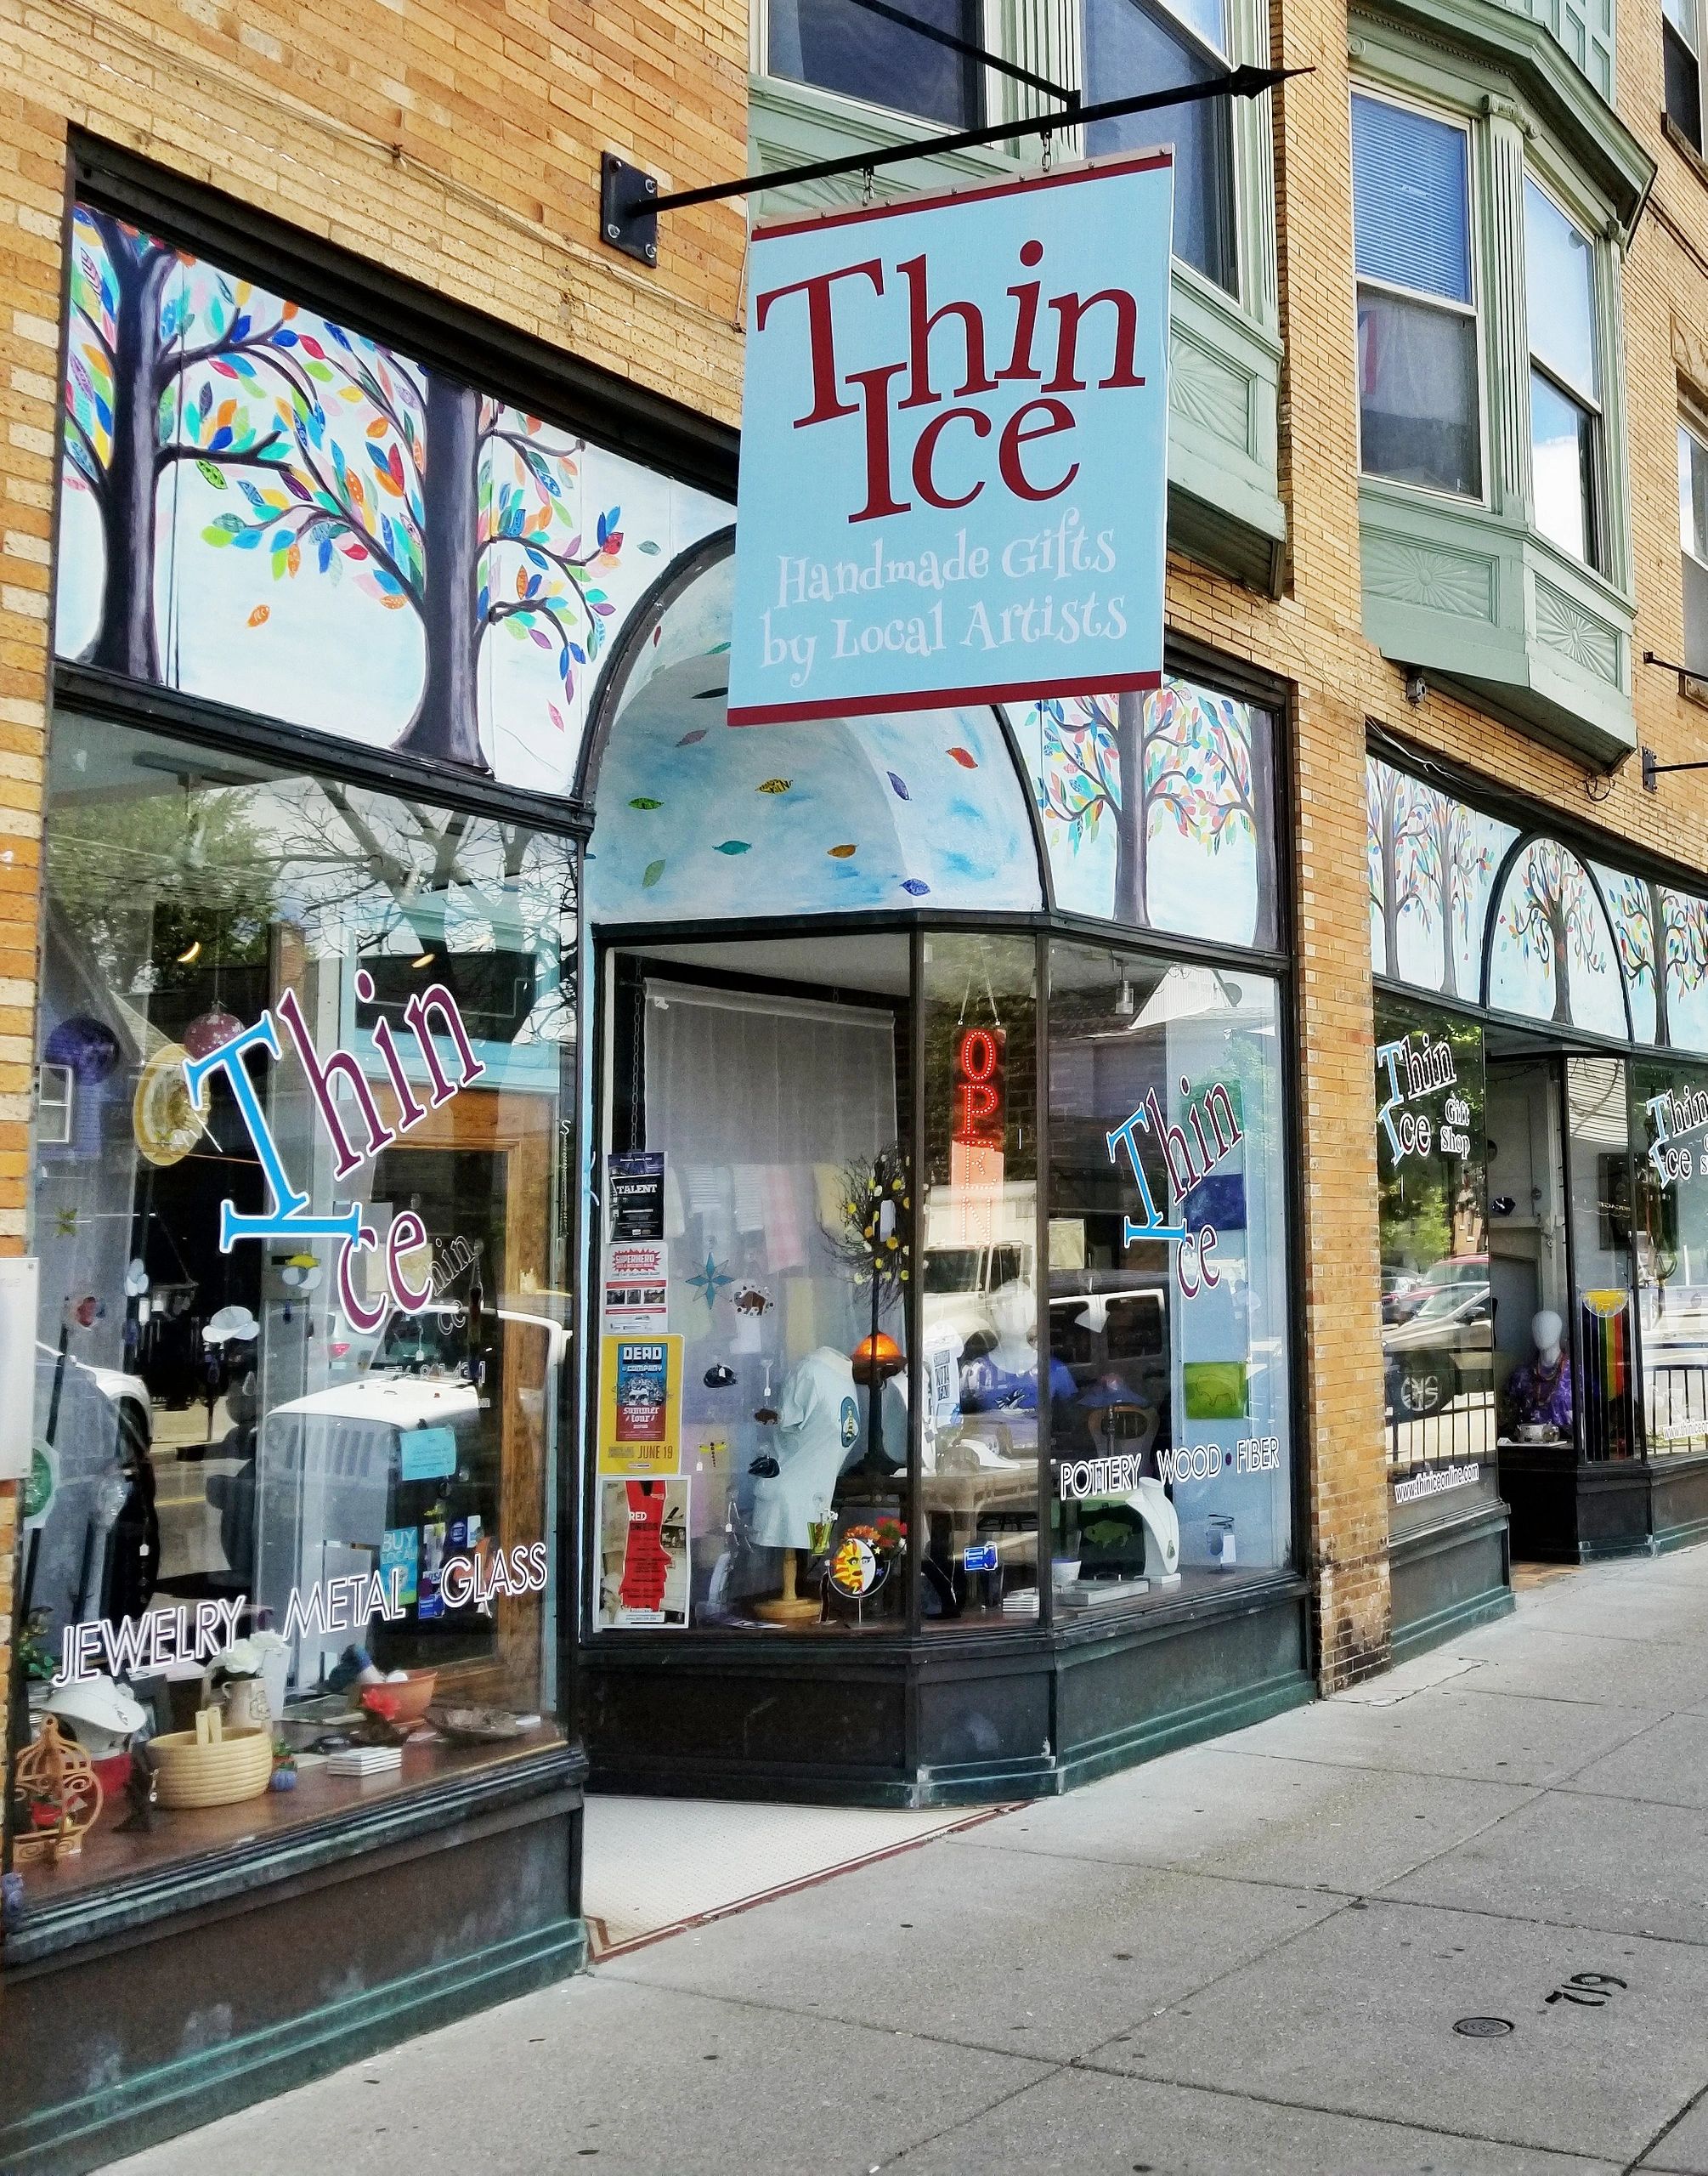 Thin Ice - Locally Handmade, Retail, Gifts and Souvenirs